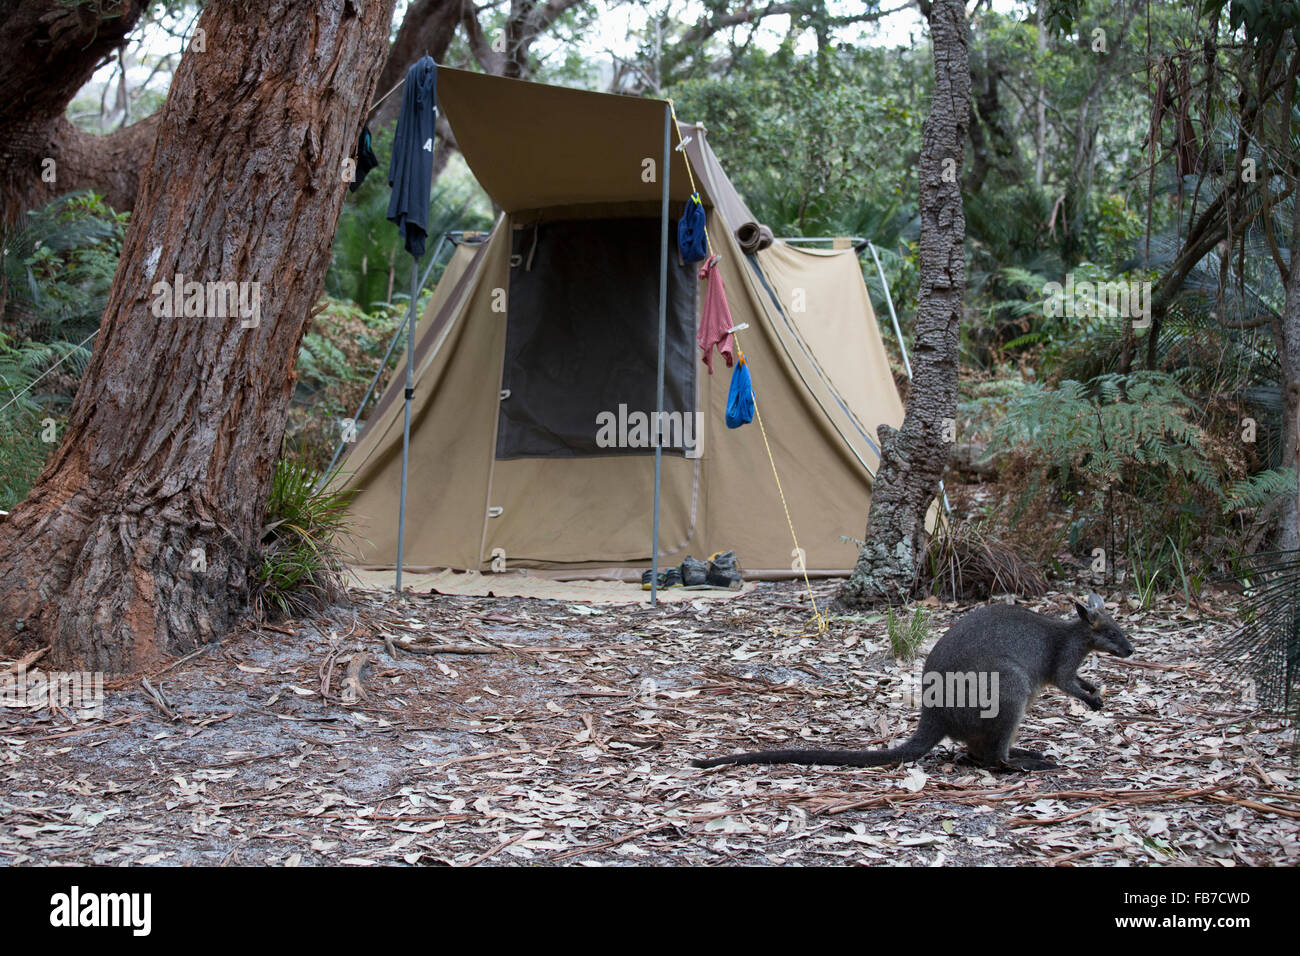 Wallaby in front of tent at national park Stock Photo